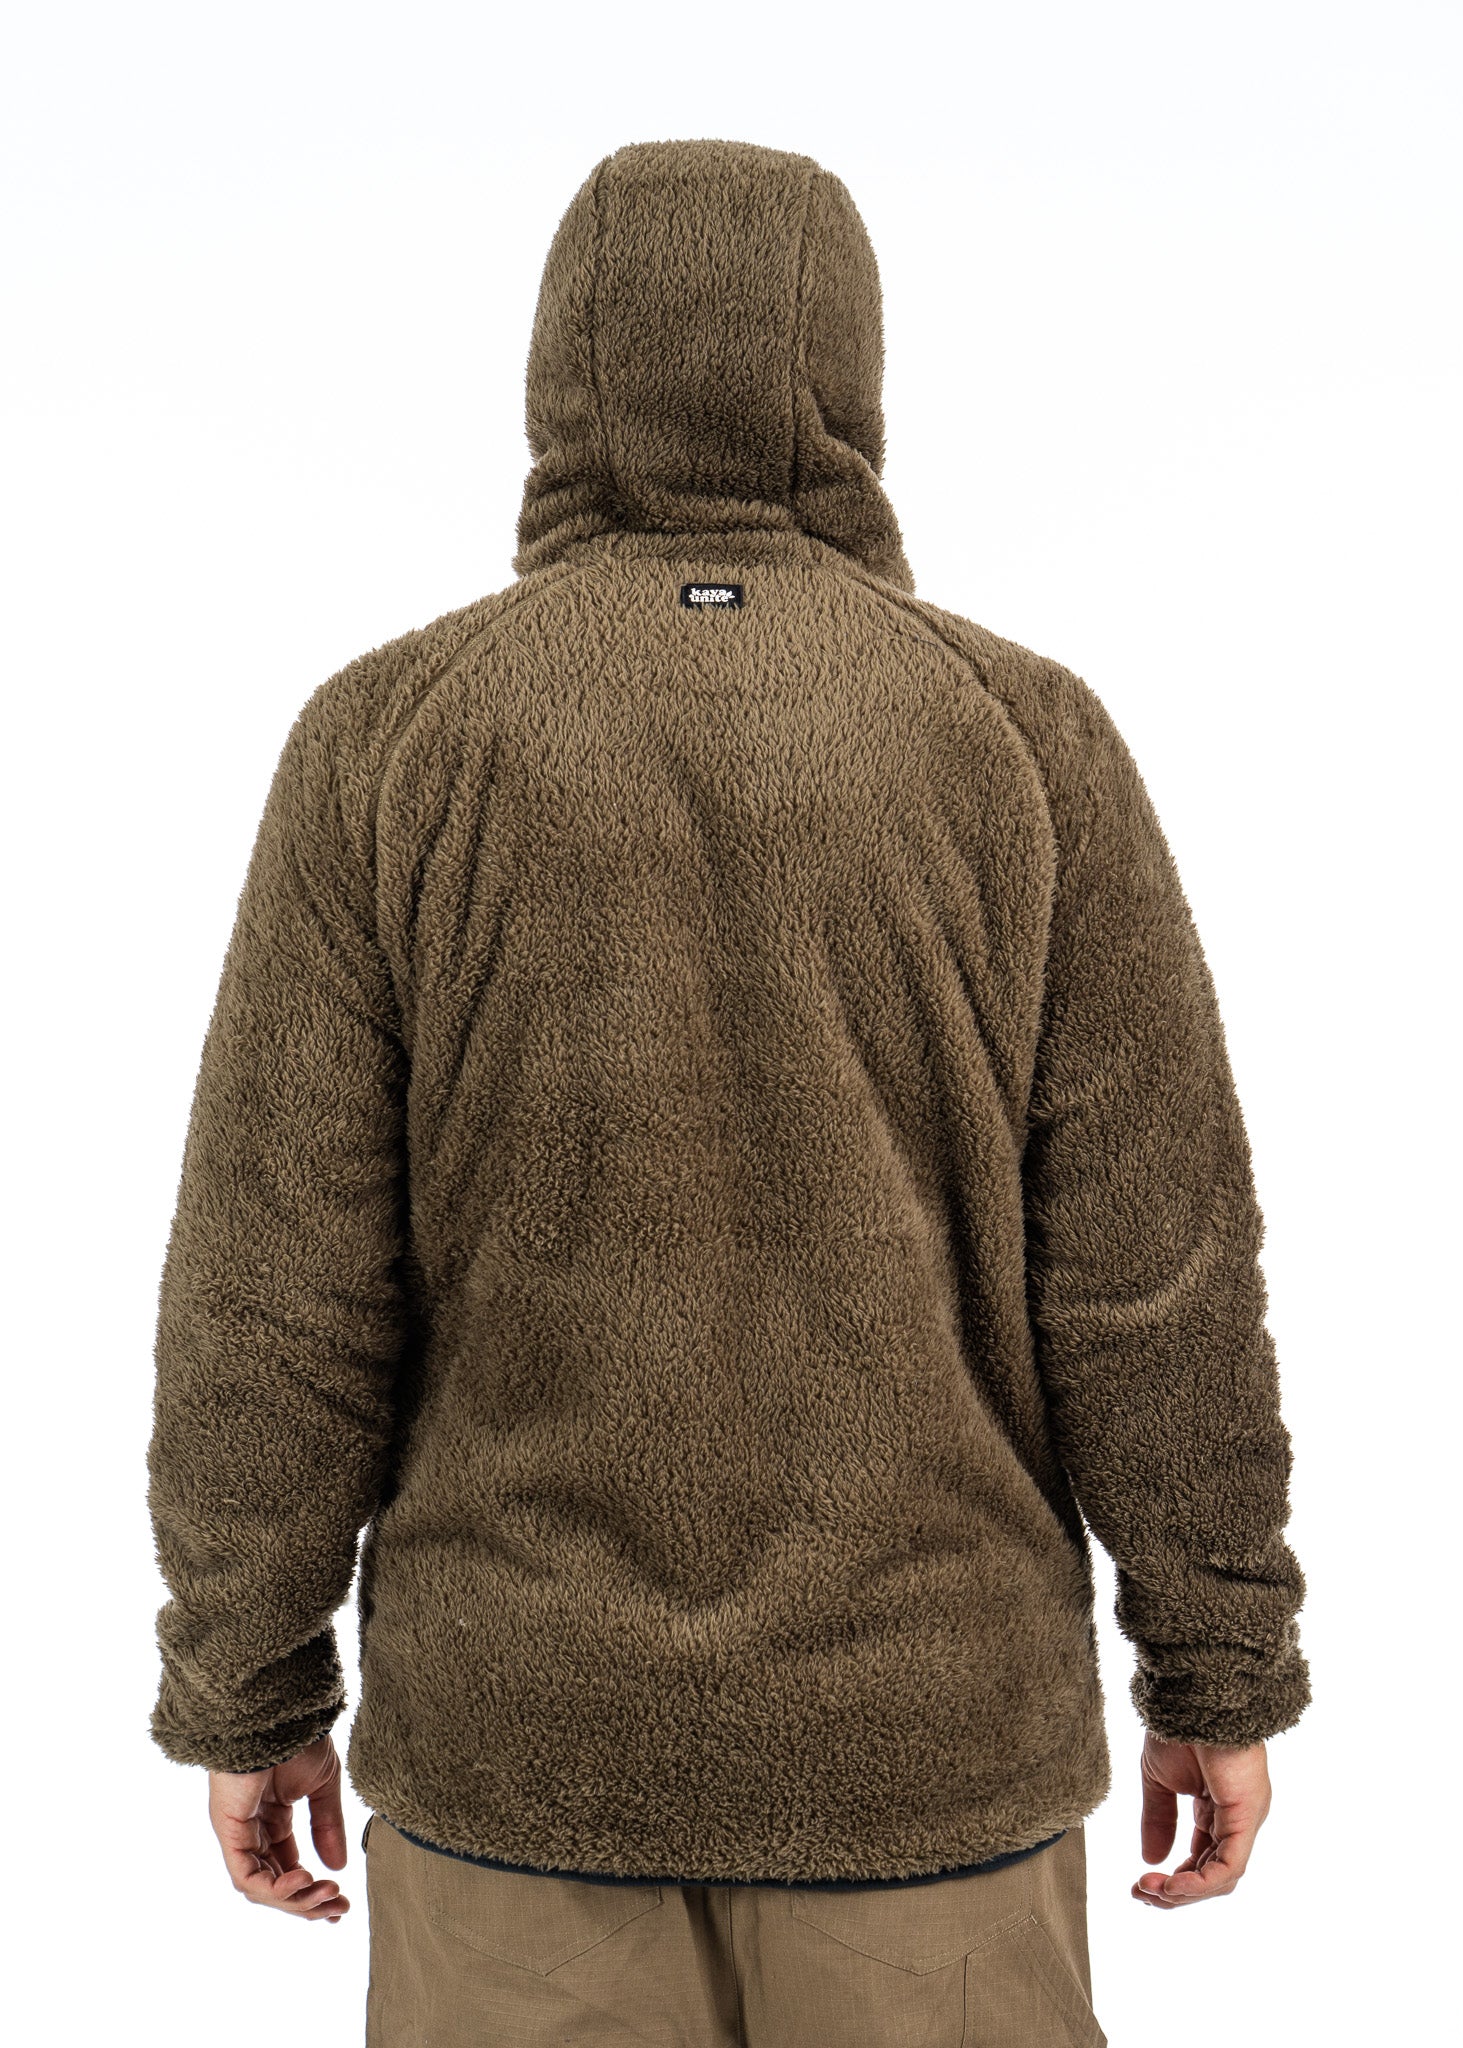 Shaggy Fleece Reversible Grizzly Brown